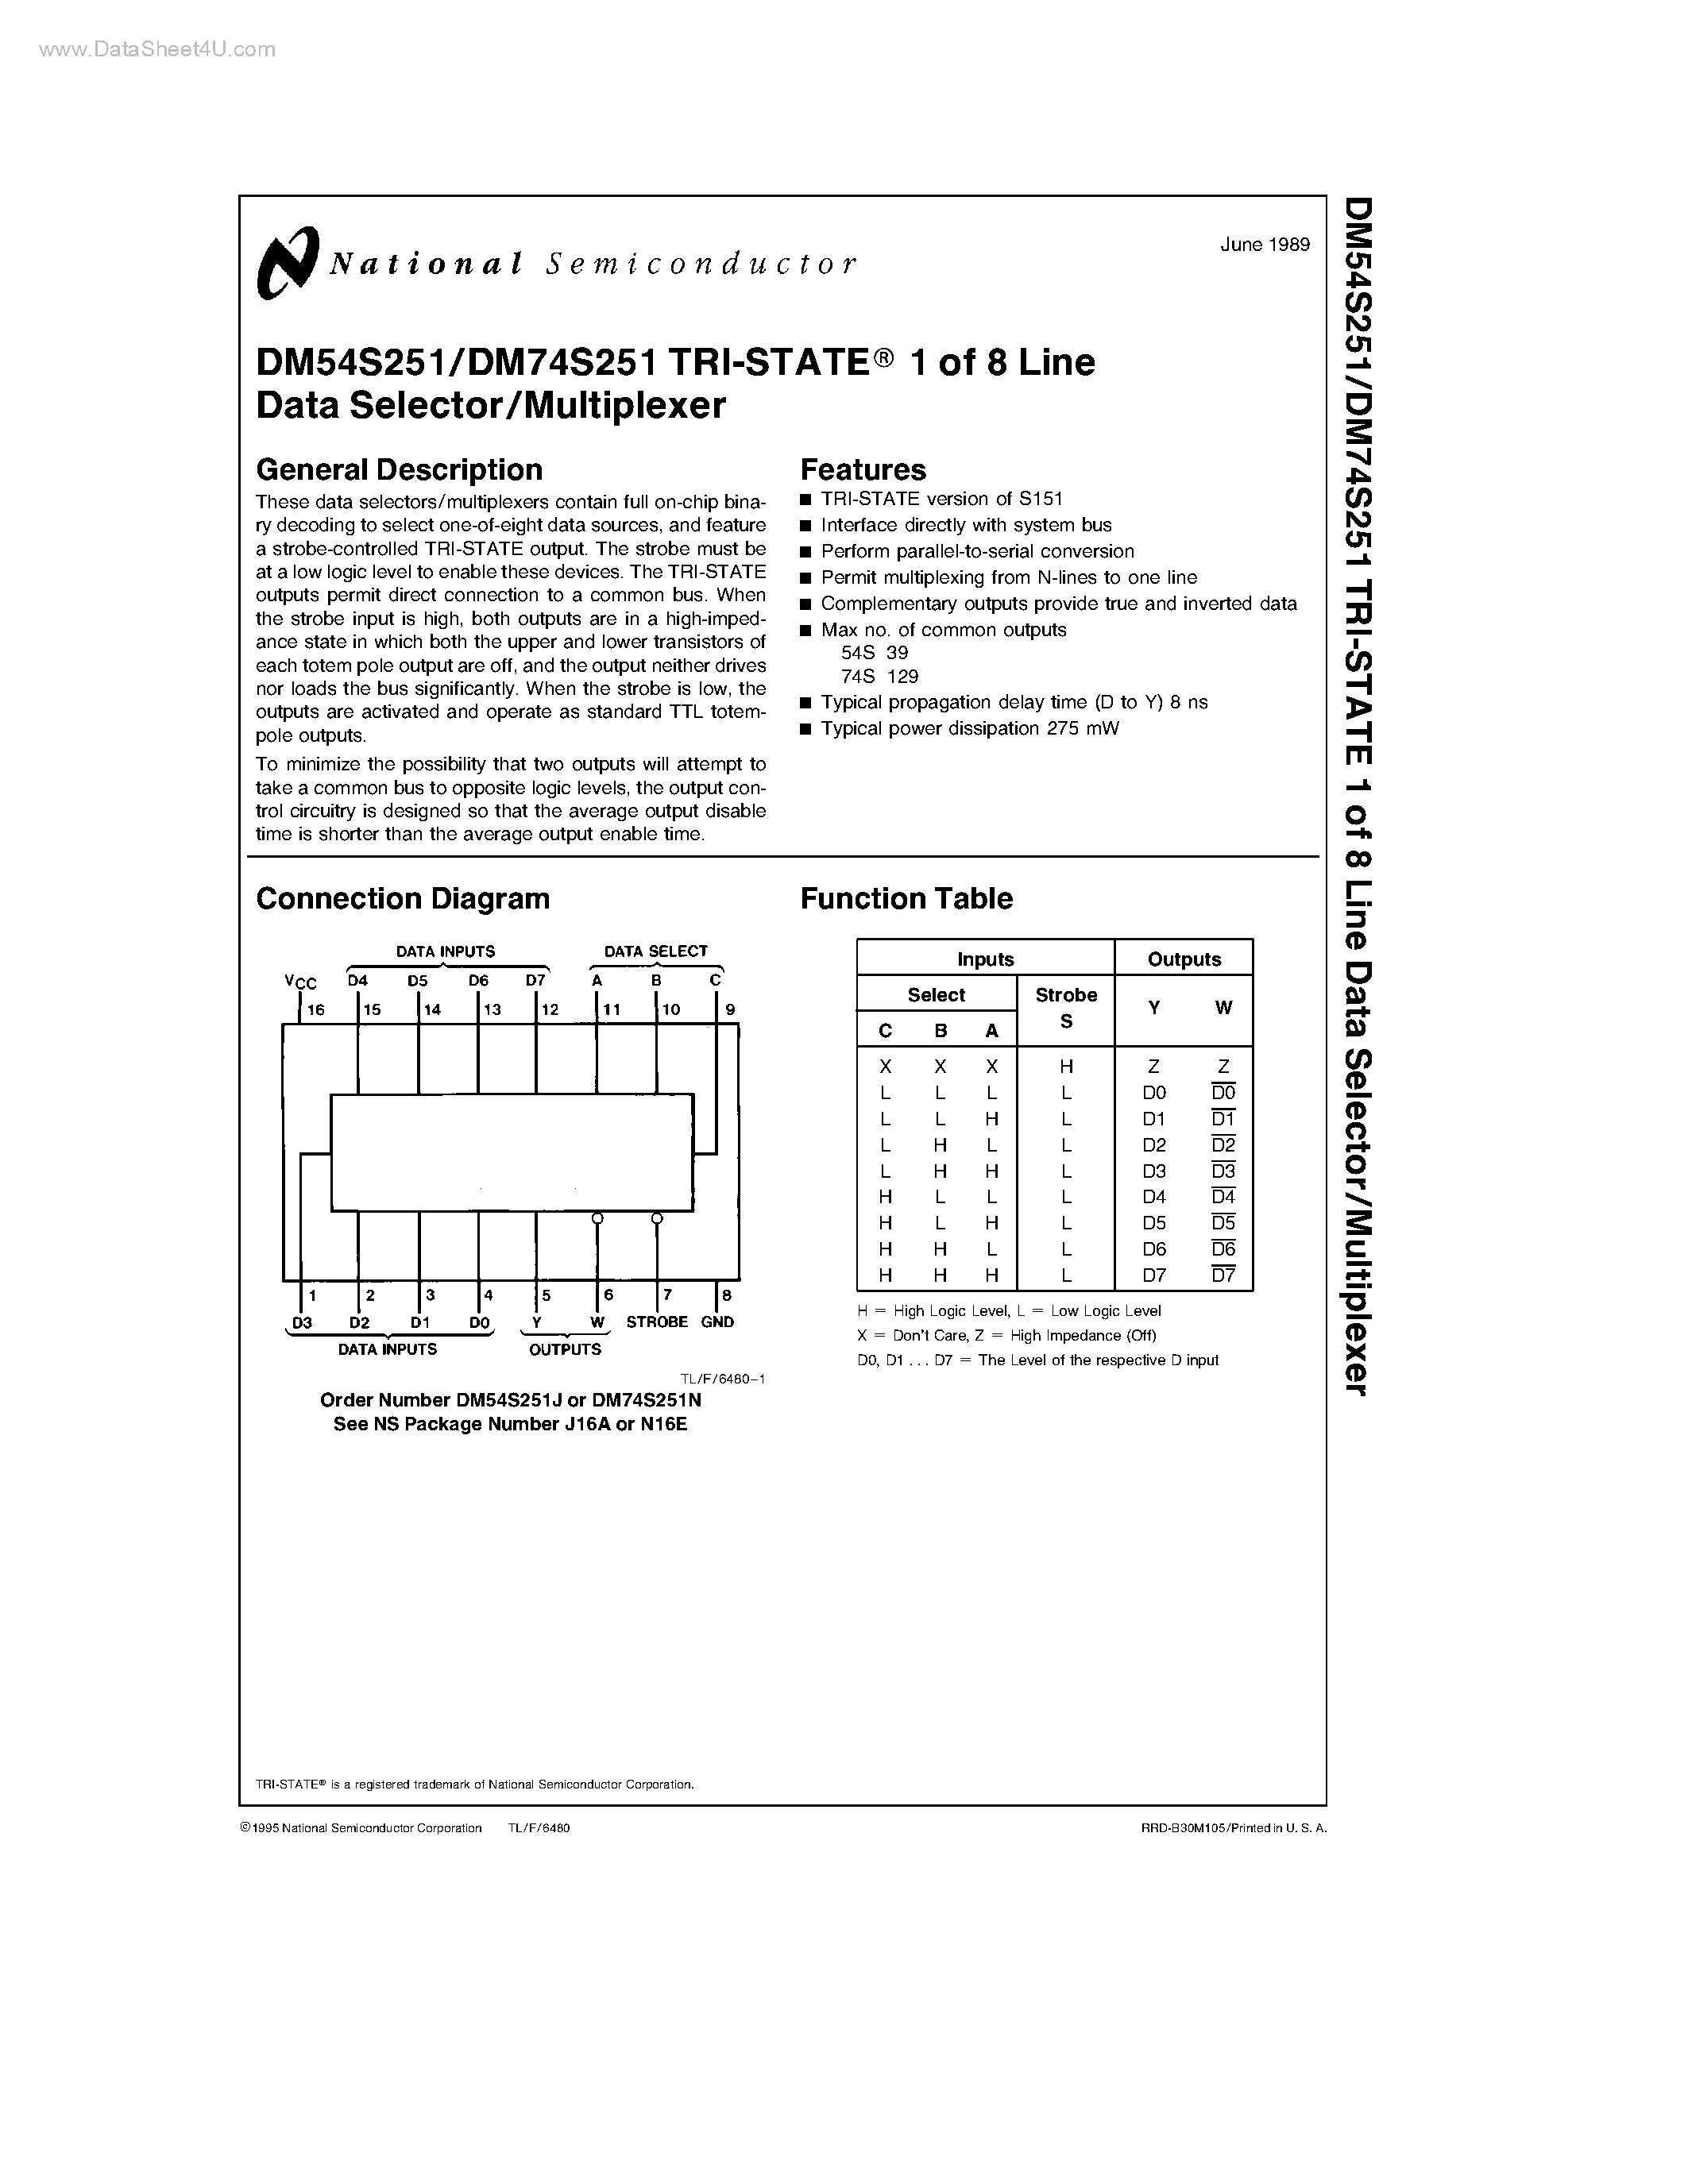 Datasheet DM74S251 - TRI-STATE 1 of 8 Line Data Selector/Multiplexer page 1